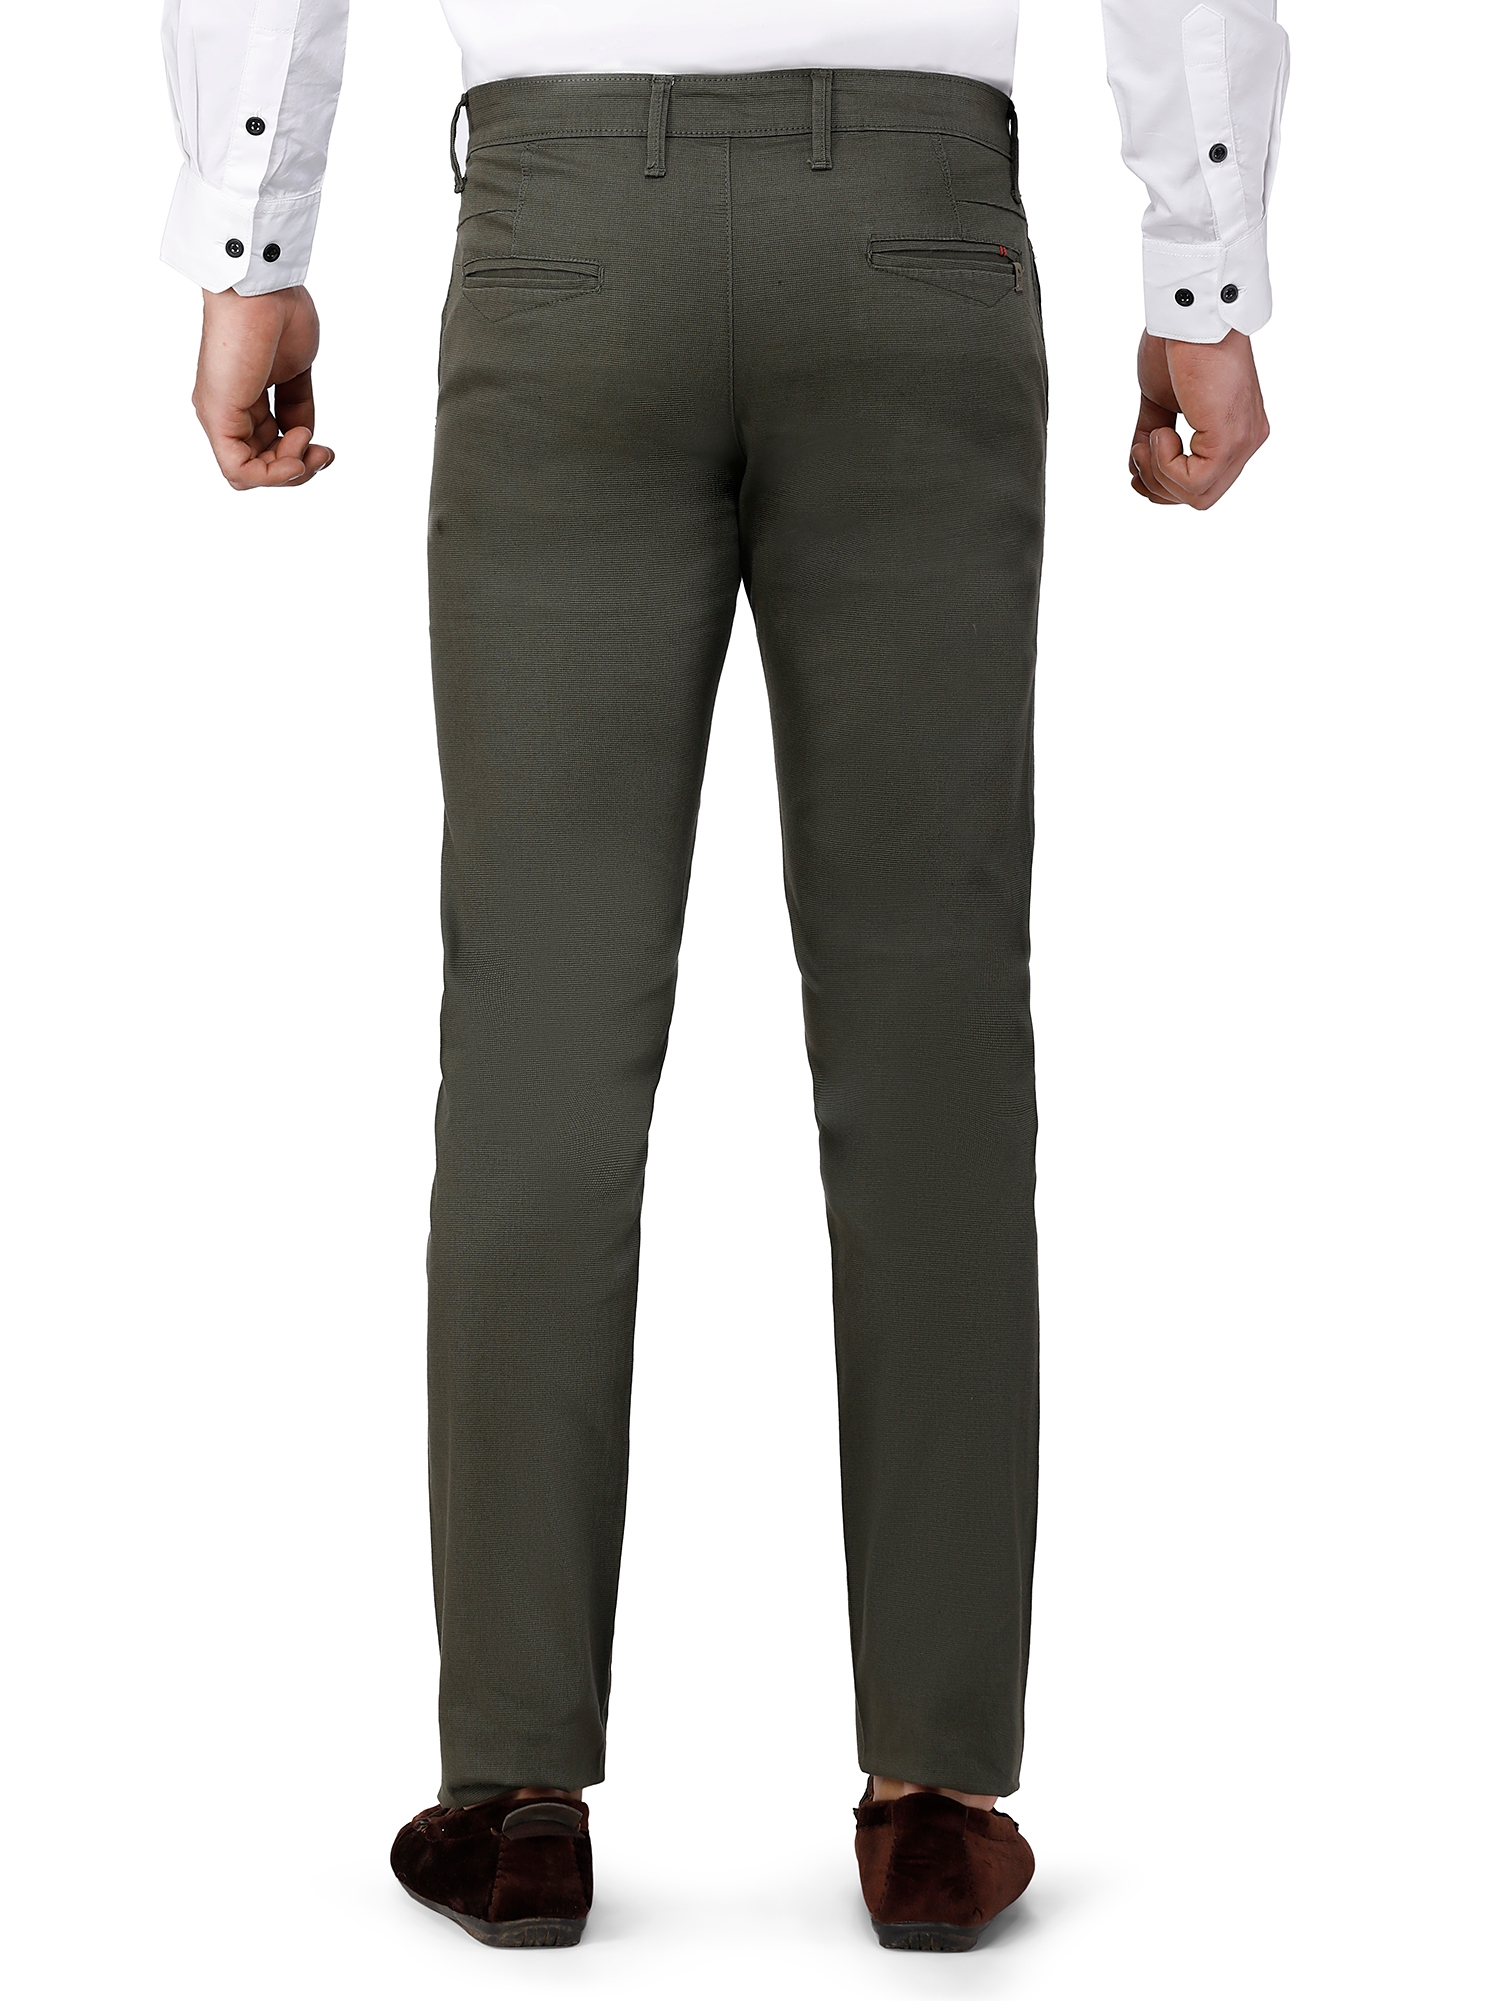 D'cot by Donear | D'cot by Donear Men Green Cotton Relaxed Solid Casual Trouser